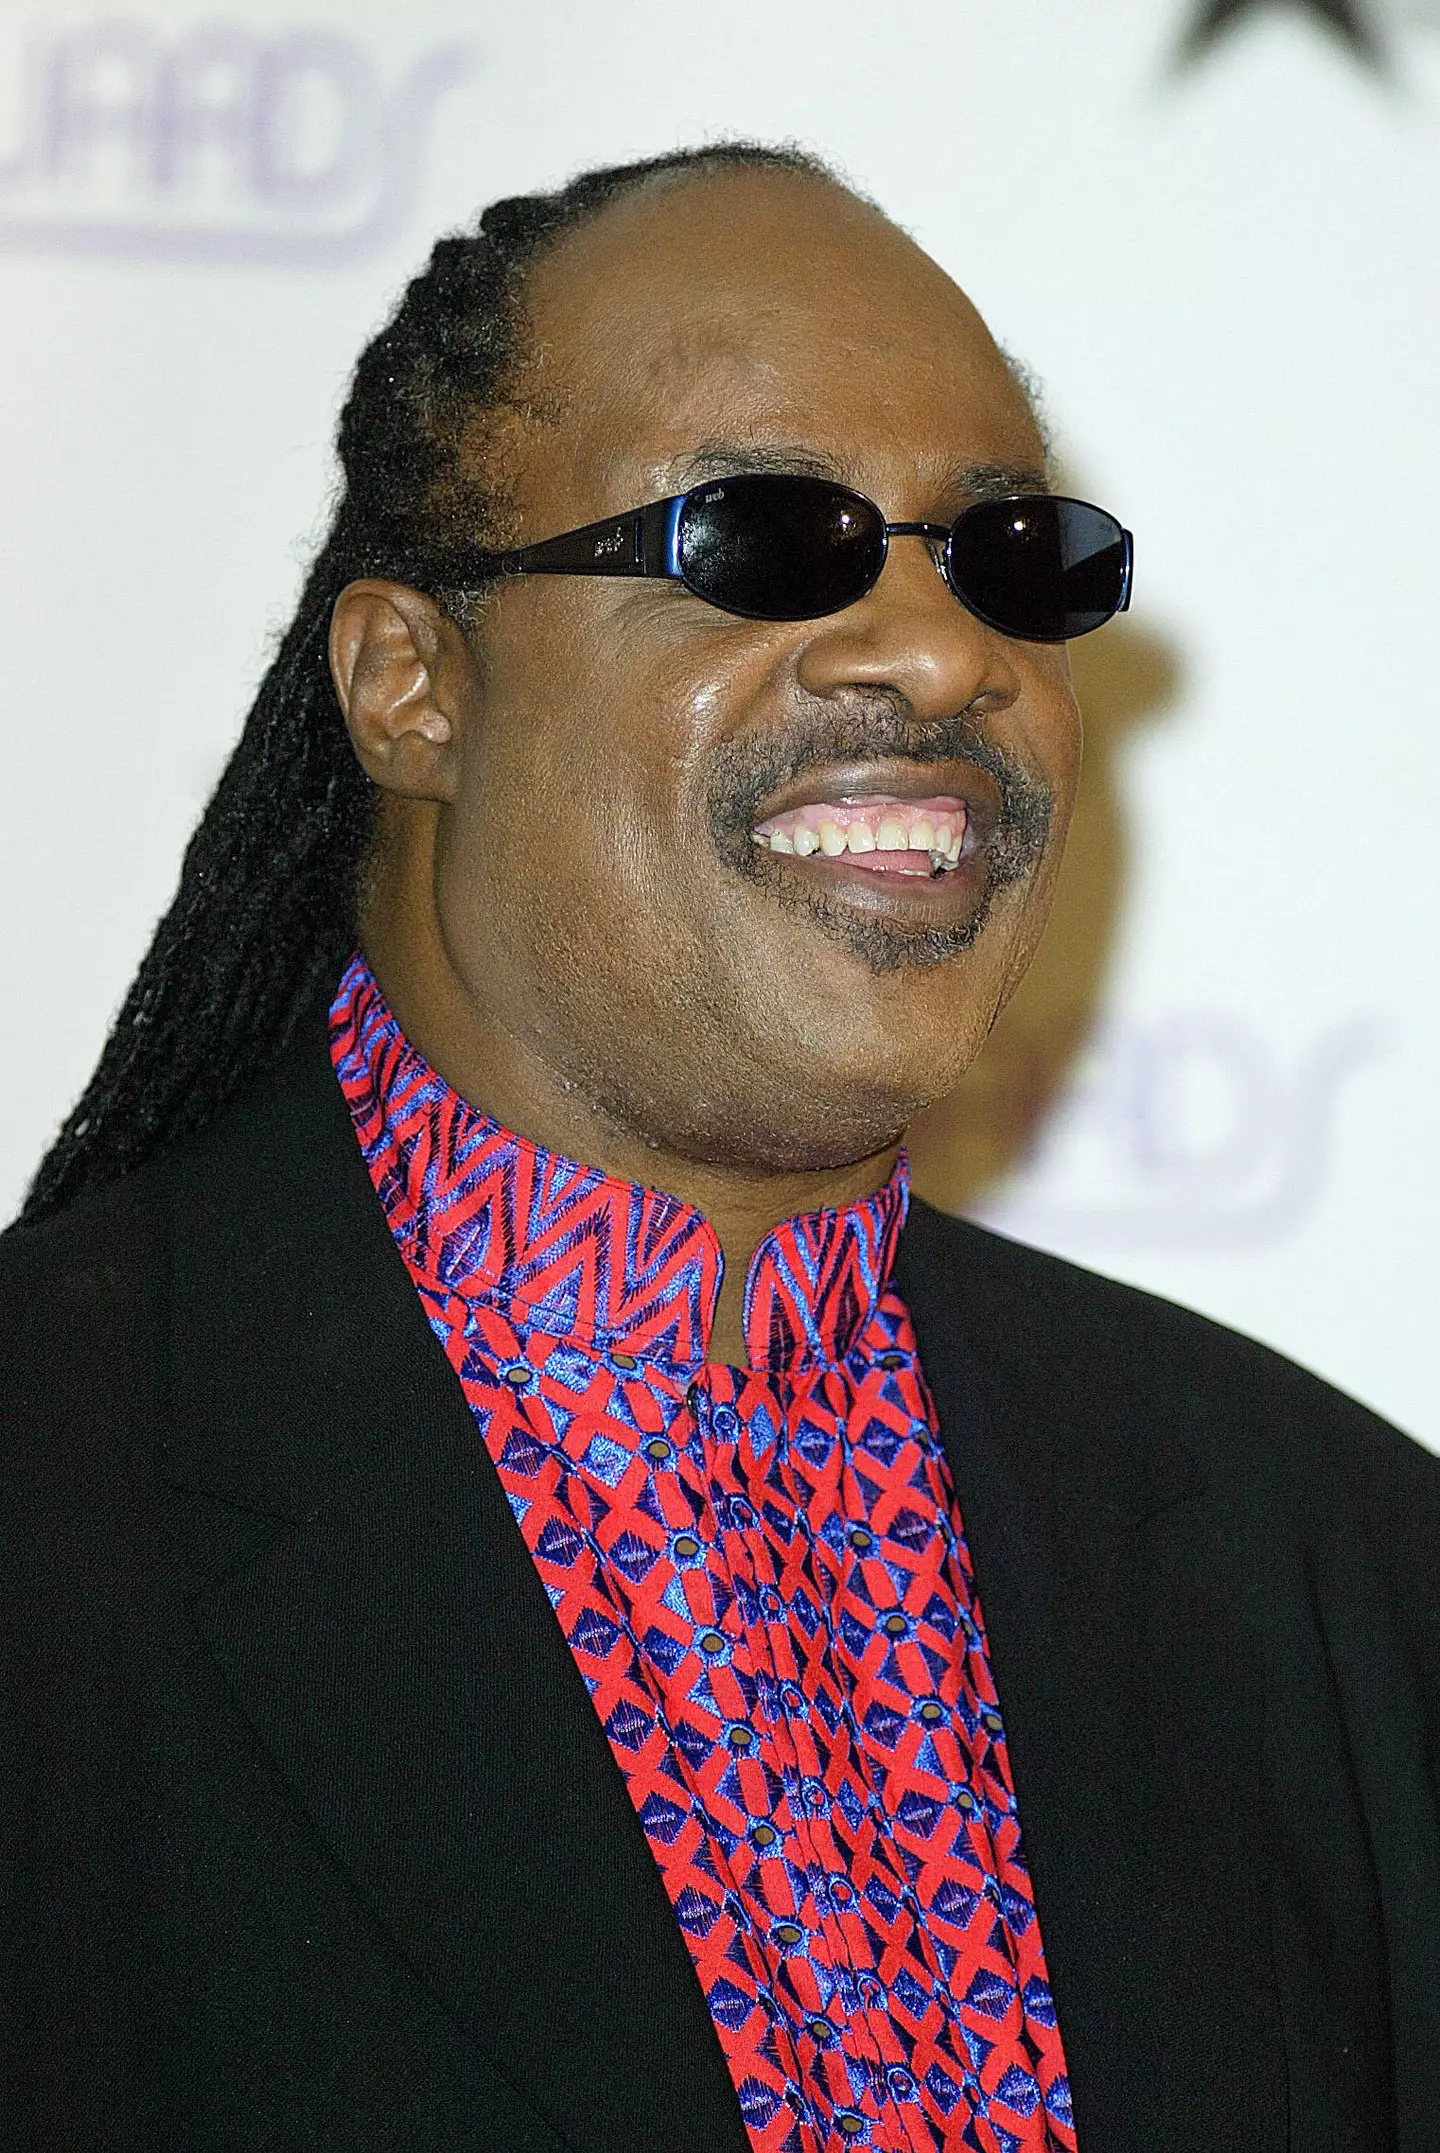 Stevie Wonder lost his sight as a baby.